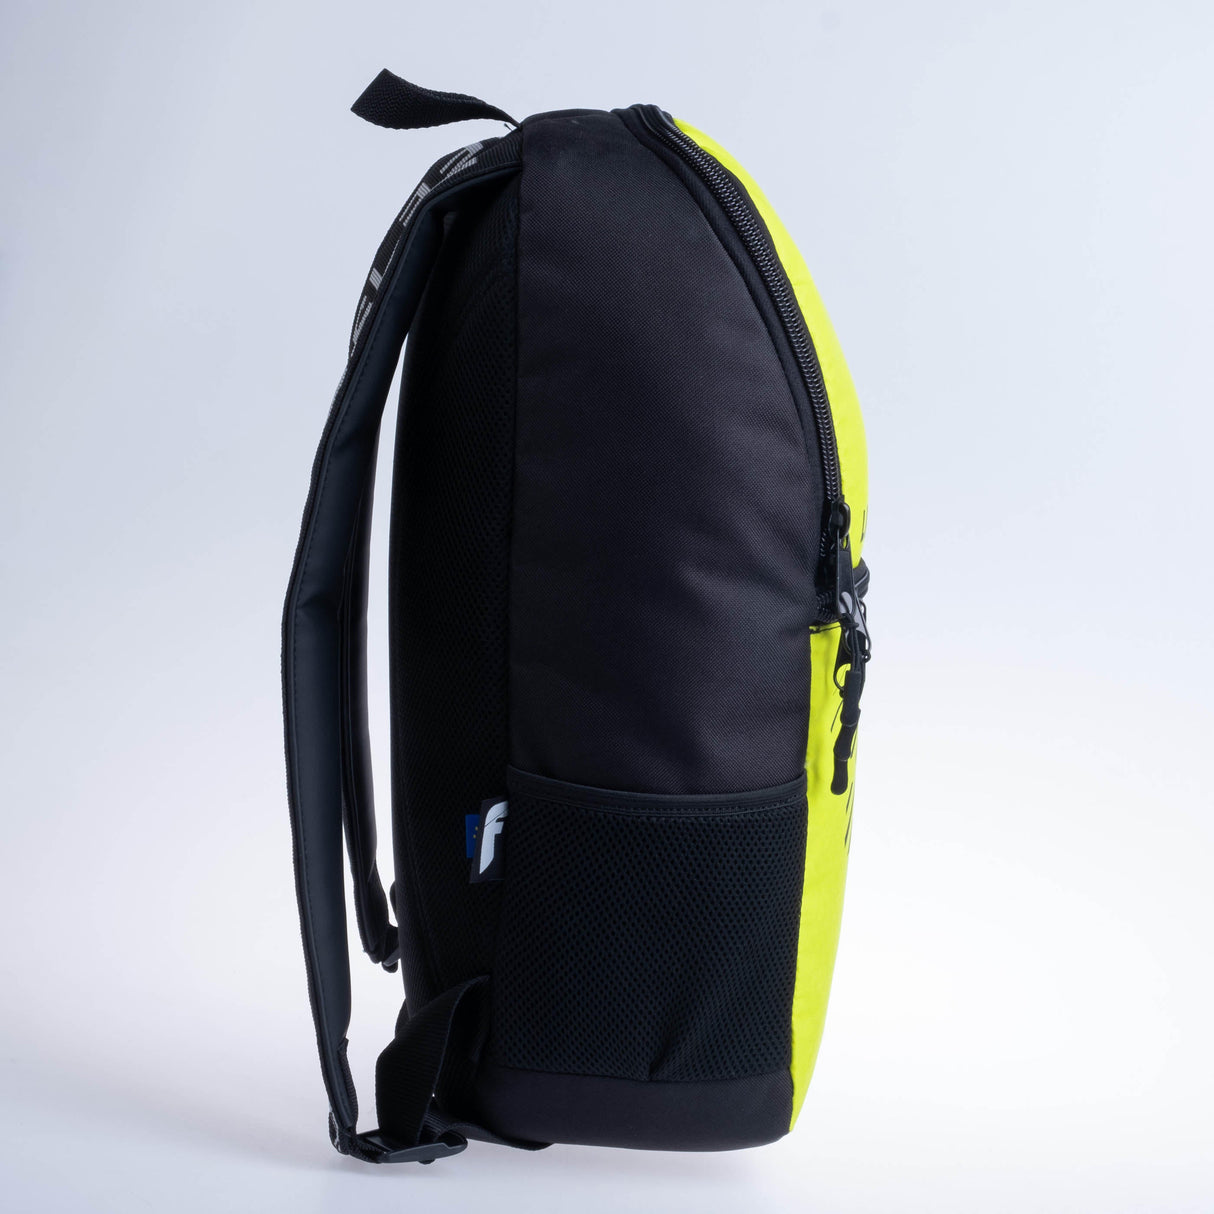 Sac à dos Fighter taille S - jaune fluo